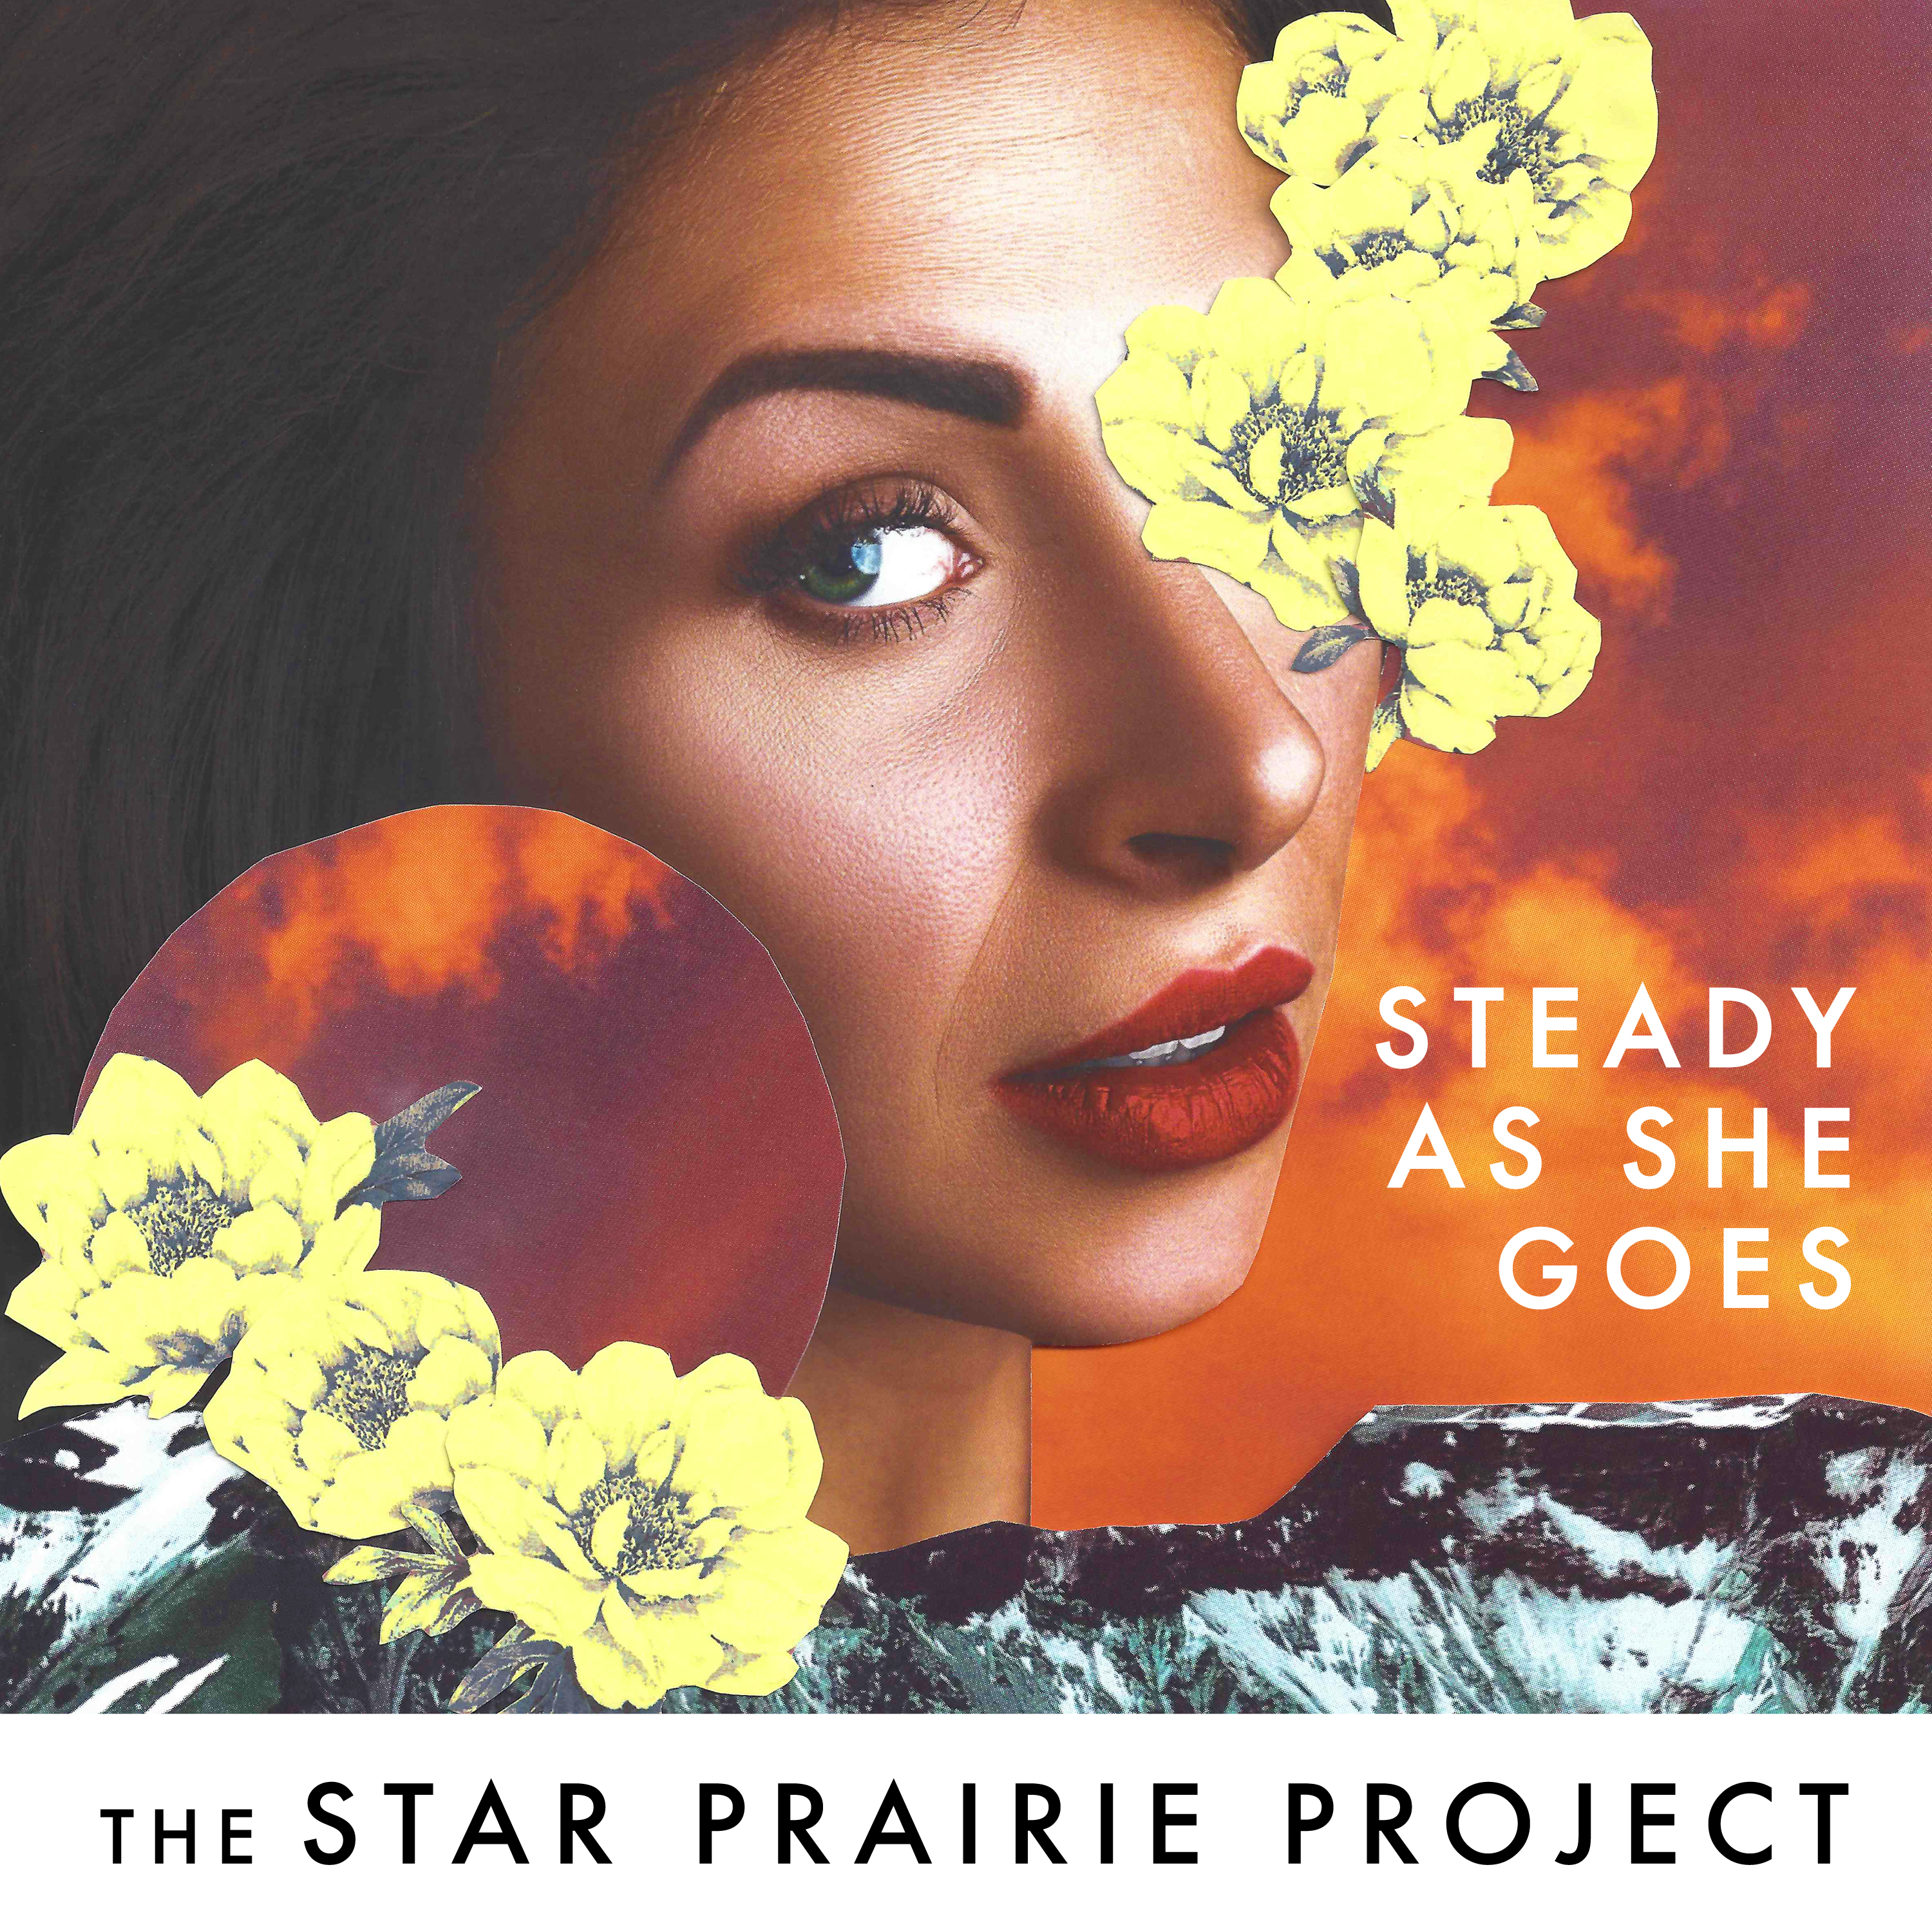 The Star Prairie Project